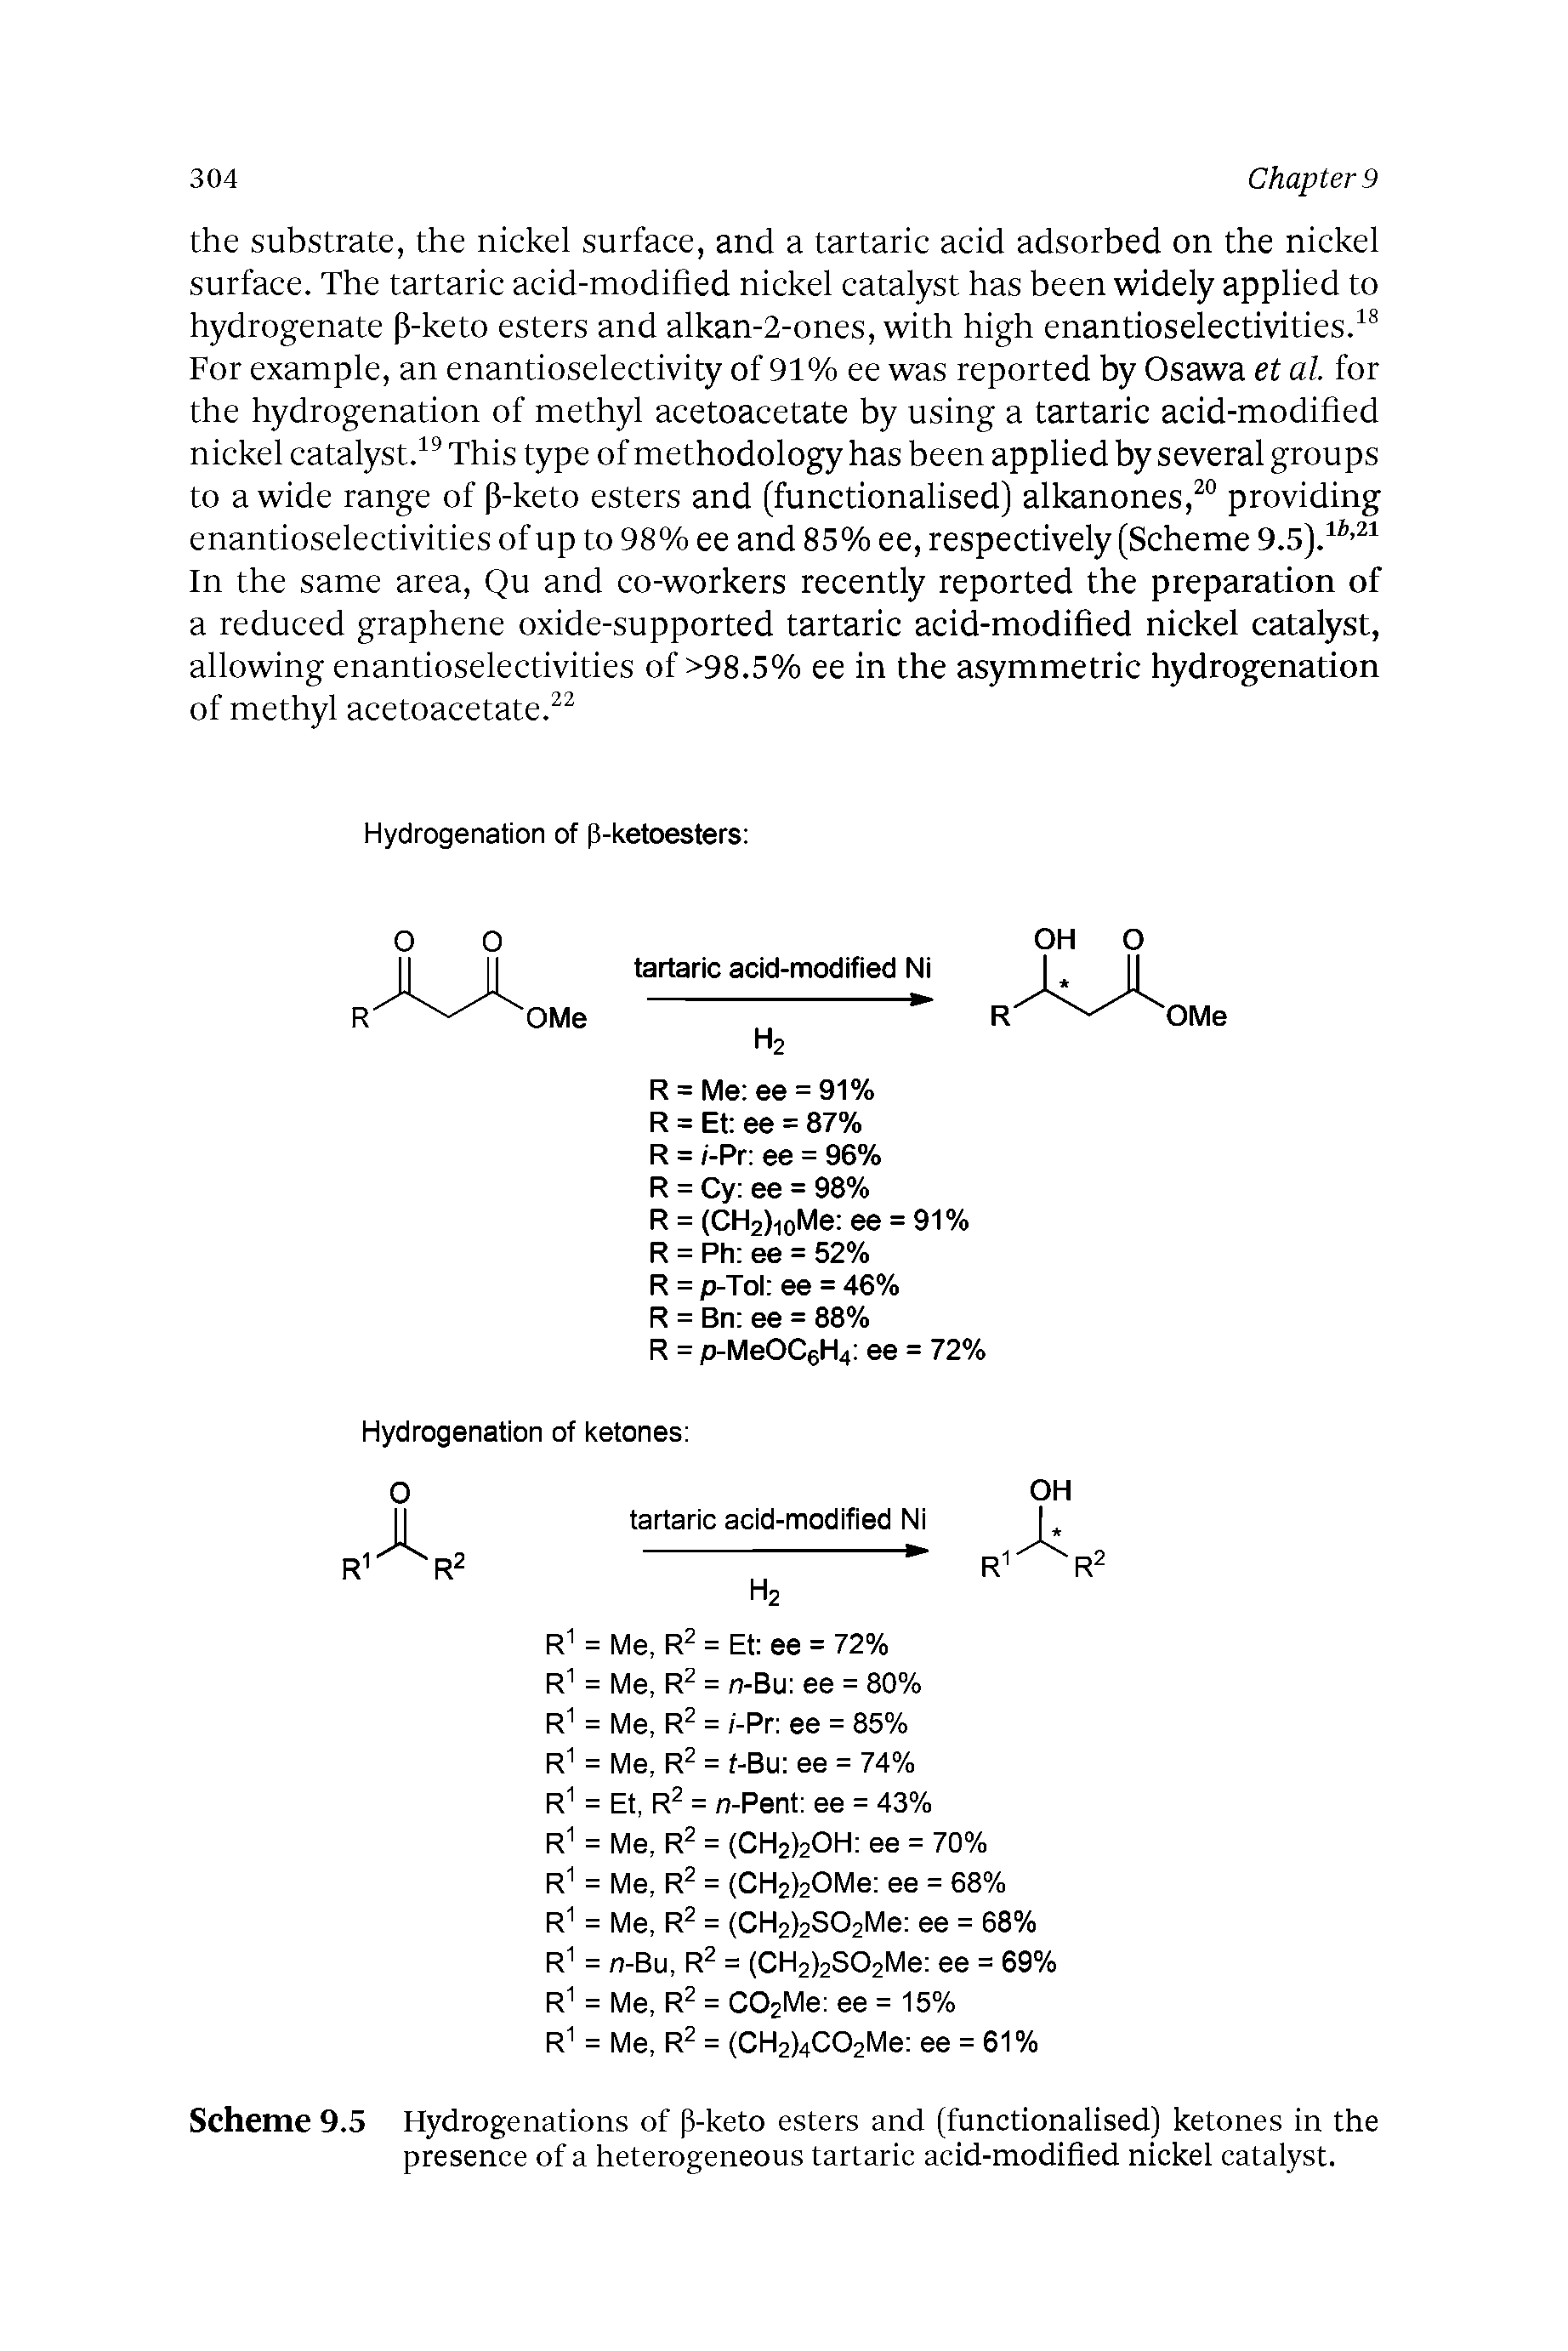 Scheme 9.5 Hydrogenations of p-keto esters and (functionalised) ketones in the presence of a heterogeneous tartaric acid-modified nickel catalyst.